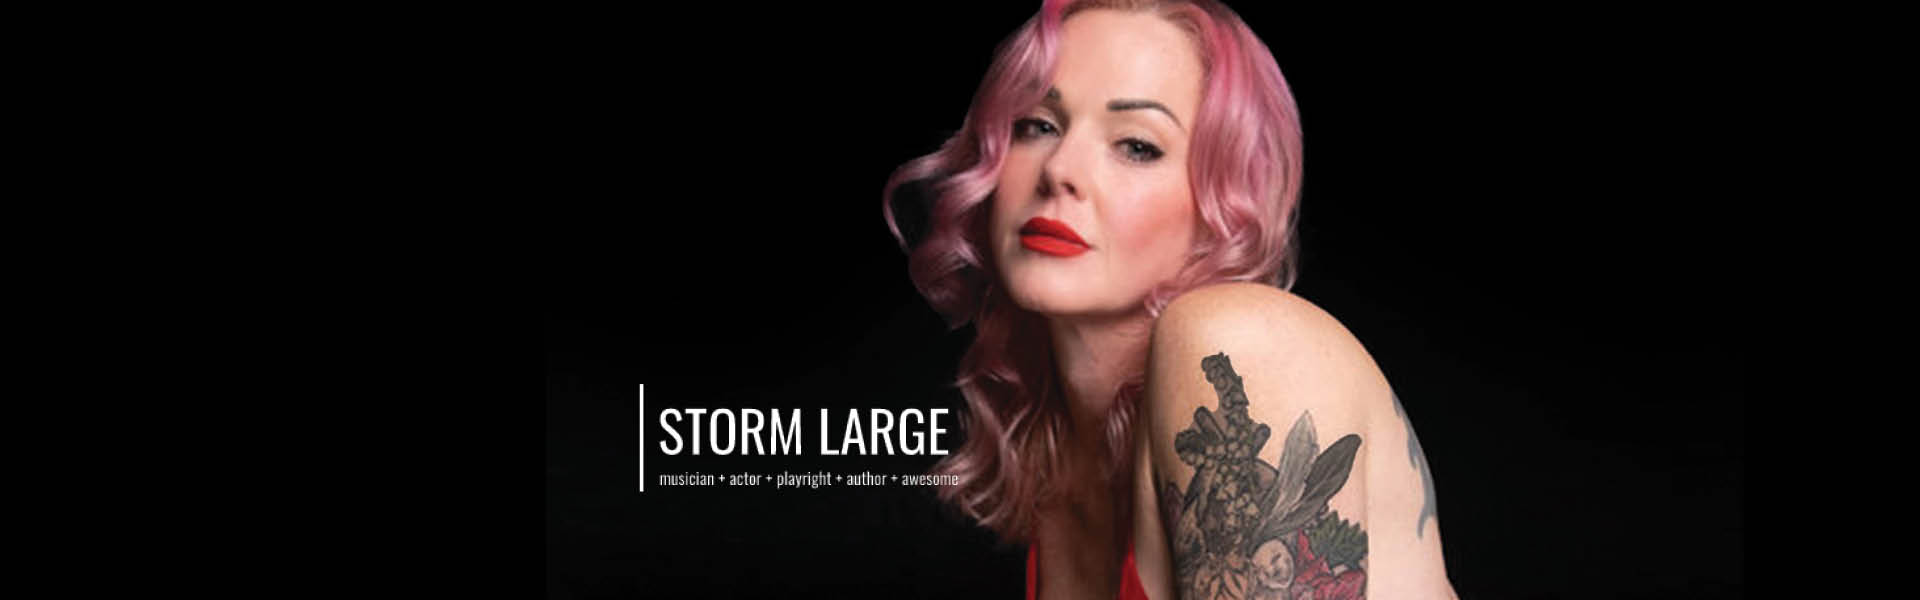 Picture of singer Storm Large